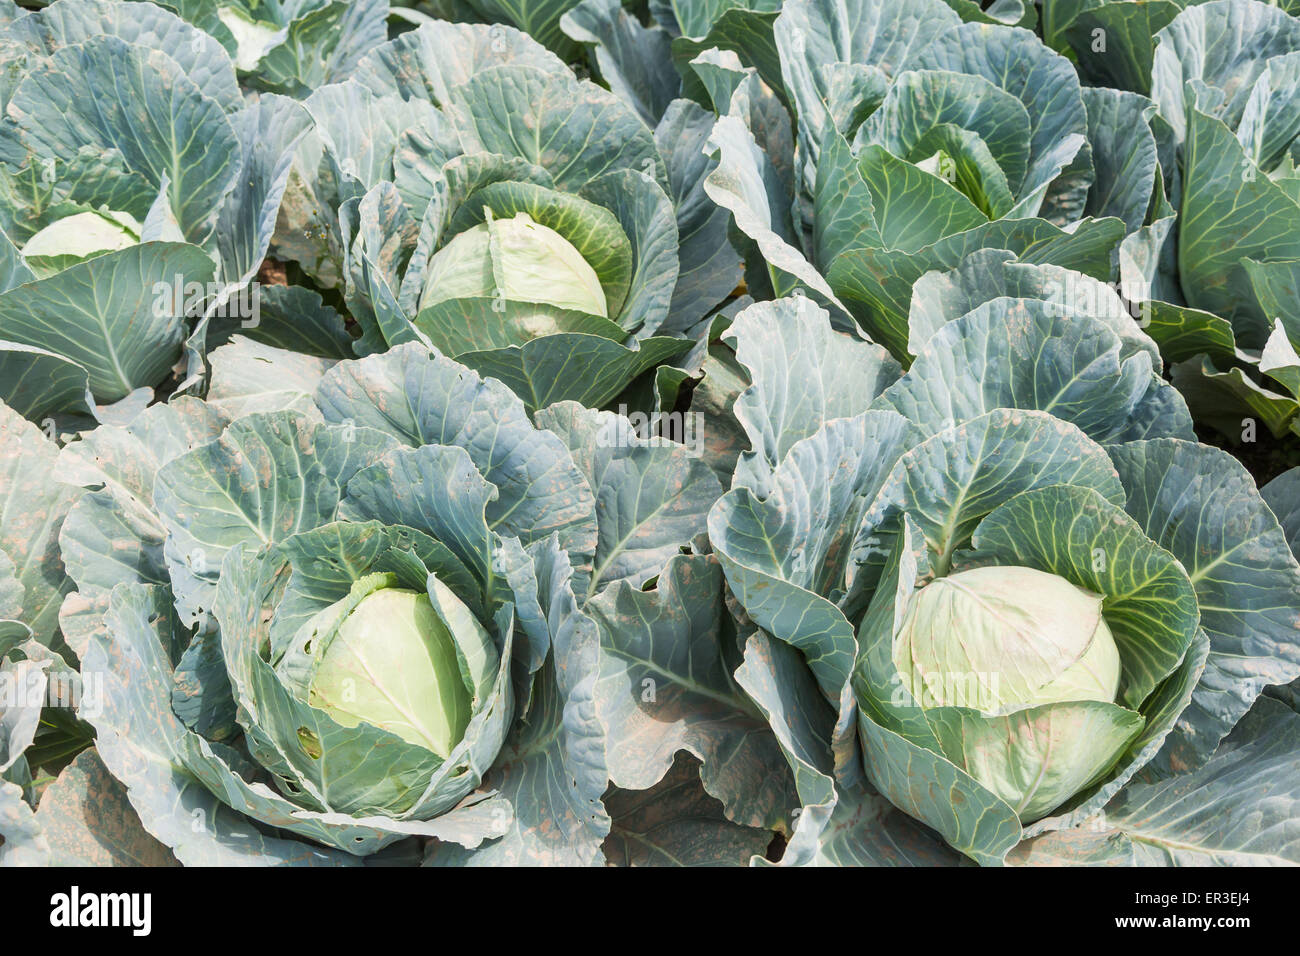 Green cabbage. Stock Photo